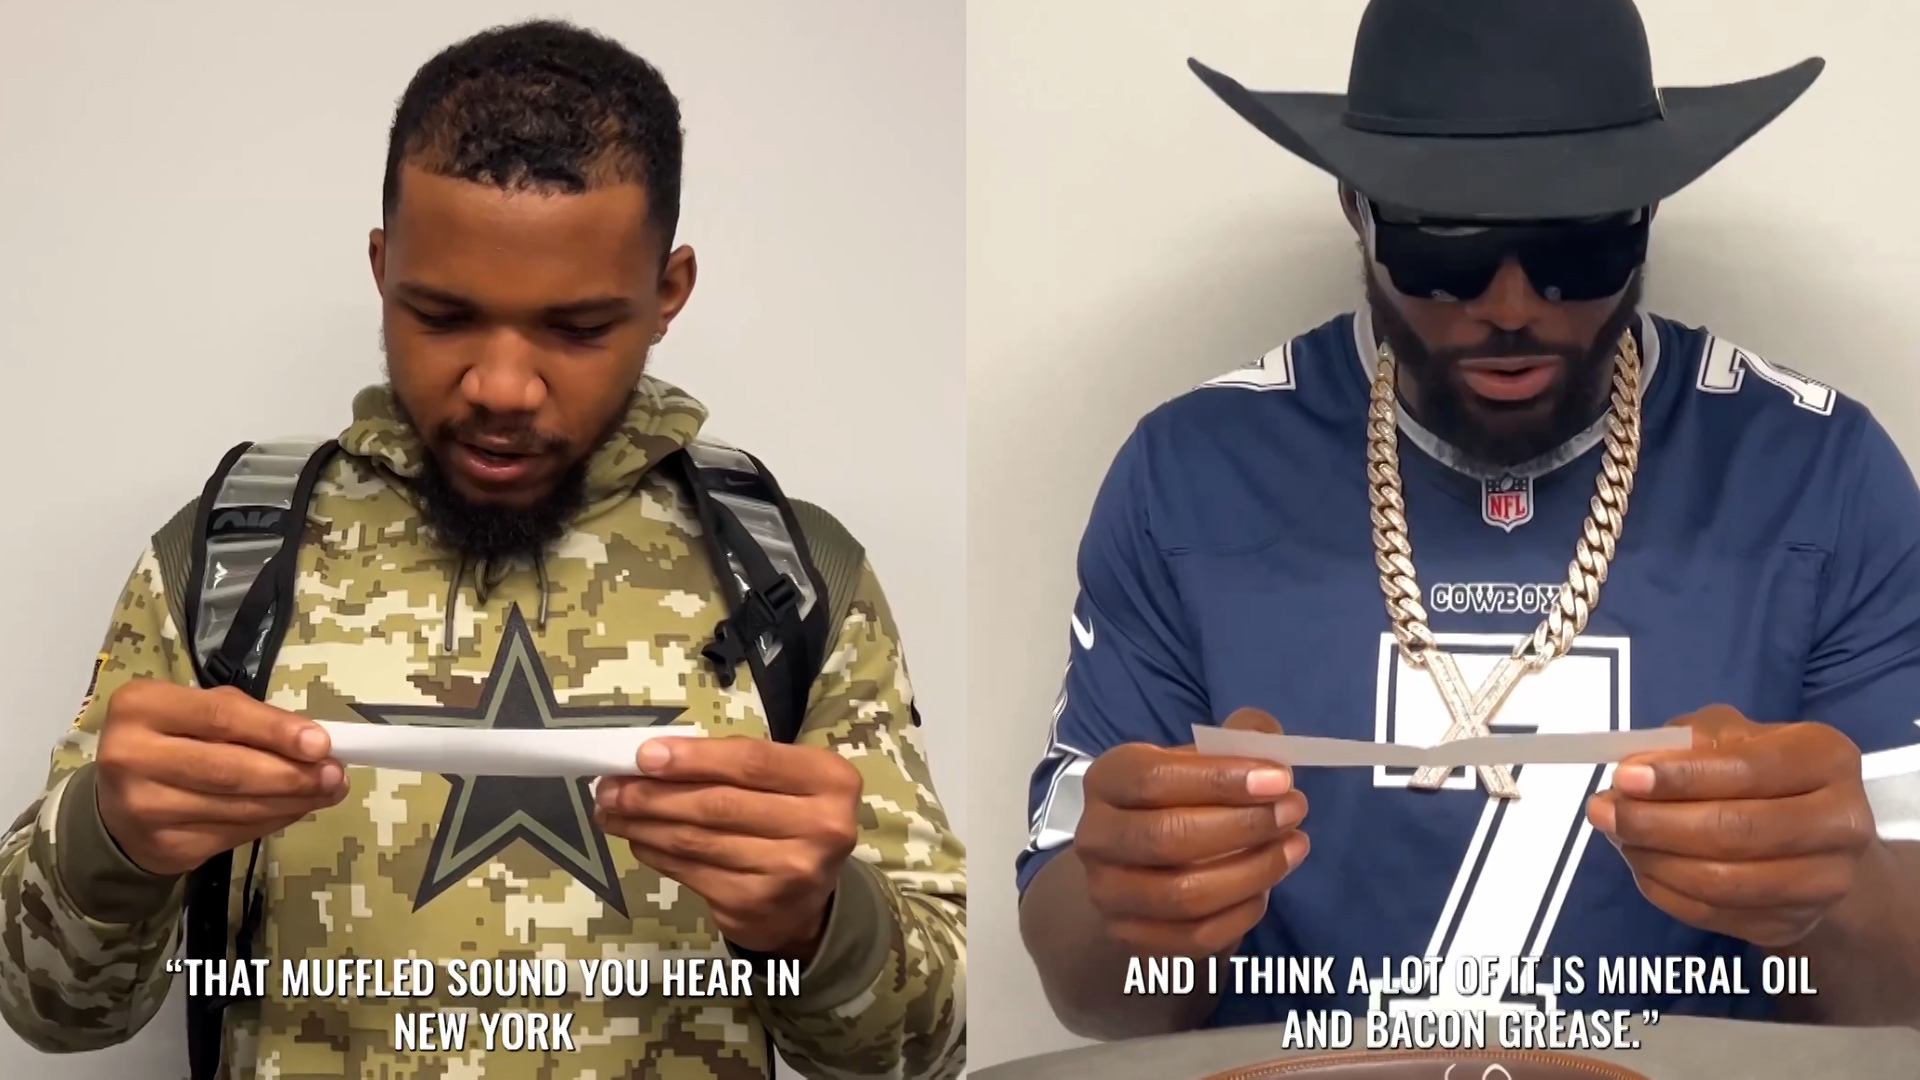 Dallas Cowboys play a hilarious round of 'Who said it': Jerry Jones or Dolly Parton?